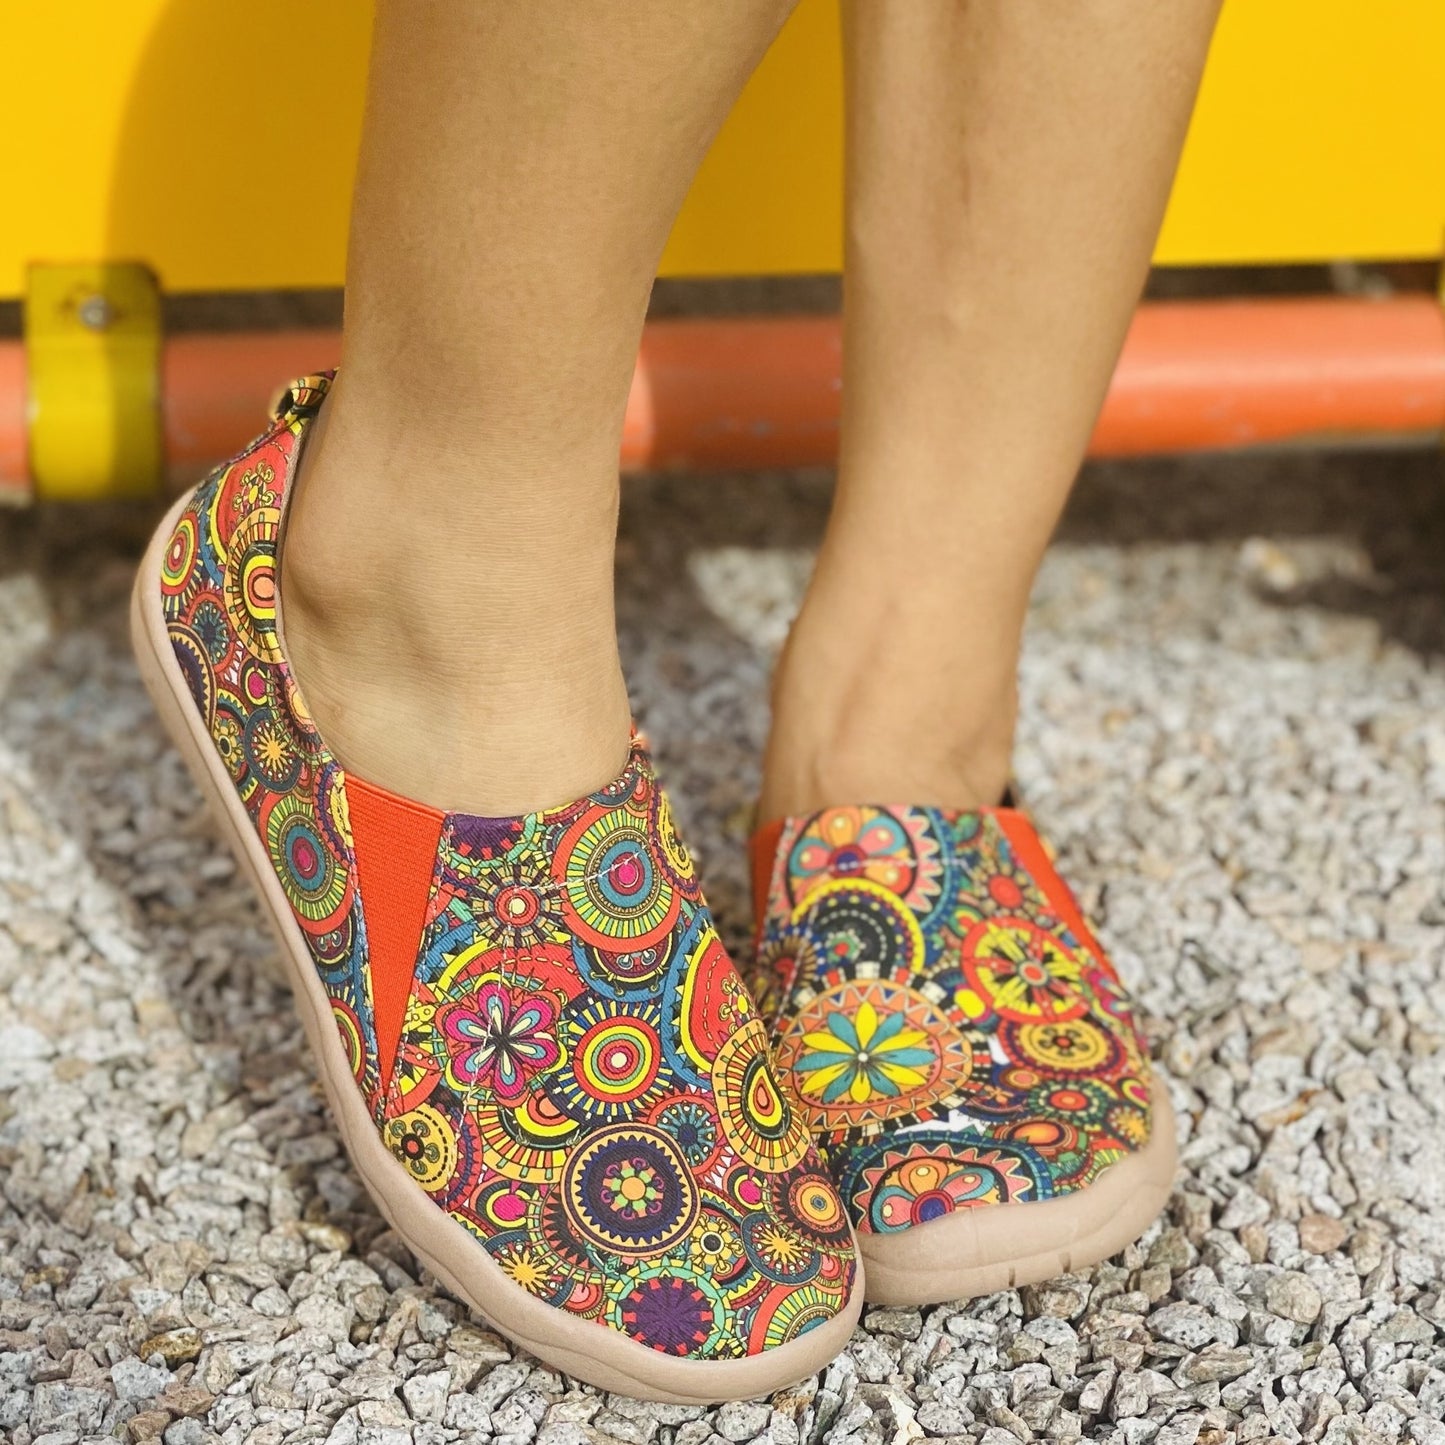 Women's Casual Canvas Shoes, Colorful Floral Print Slip On Walking Shoes, Comfy Flat Travel Shoes